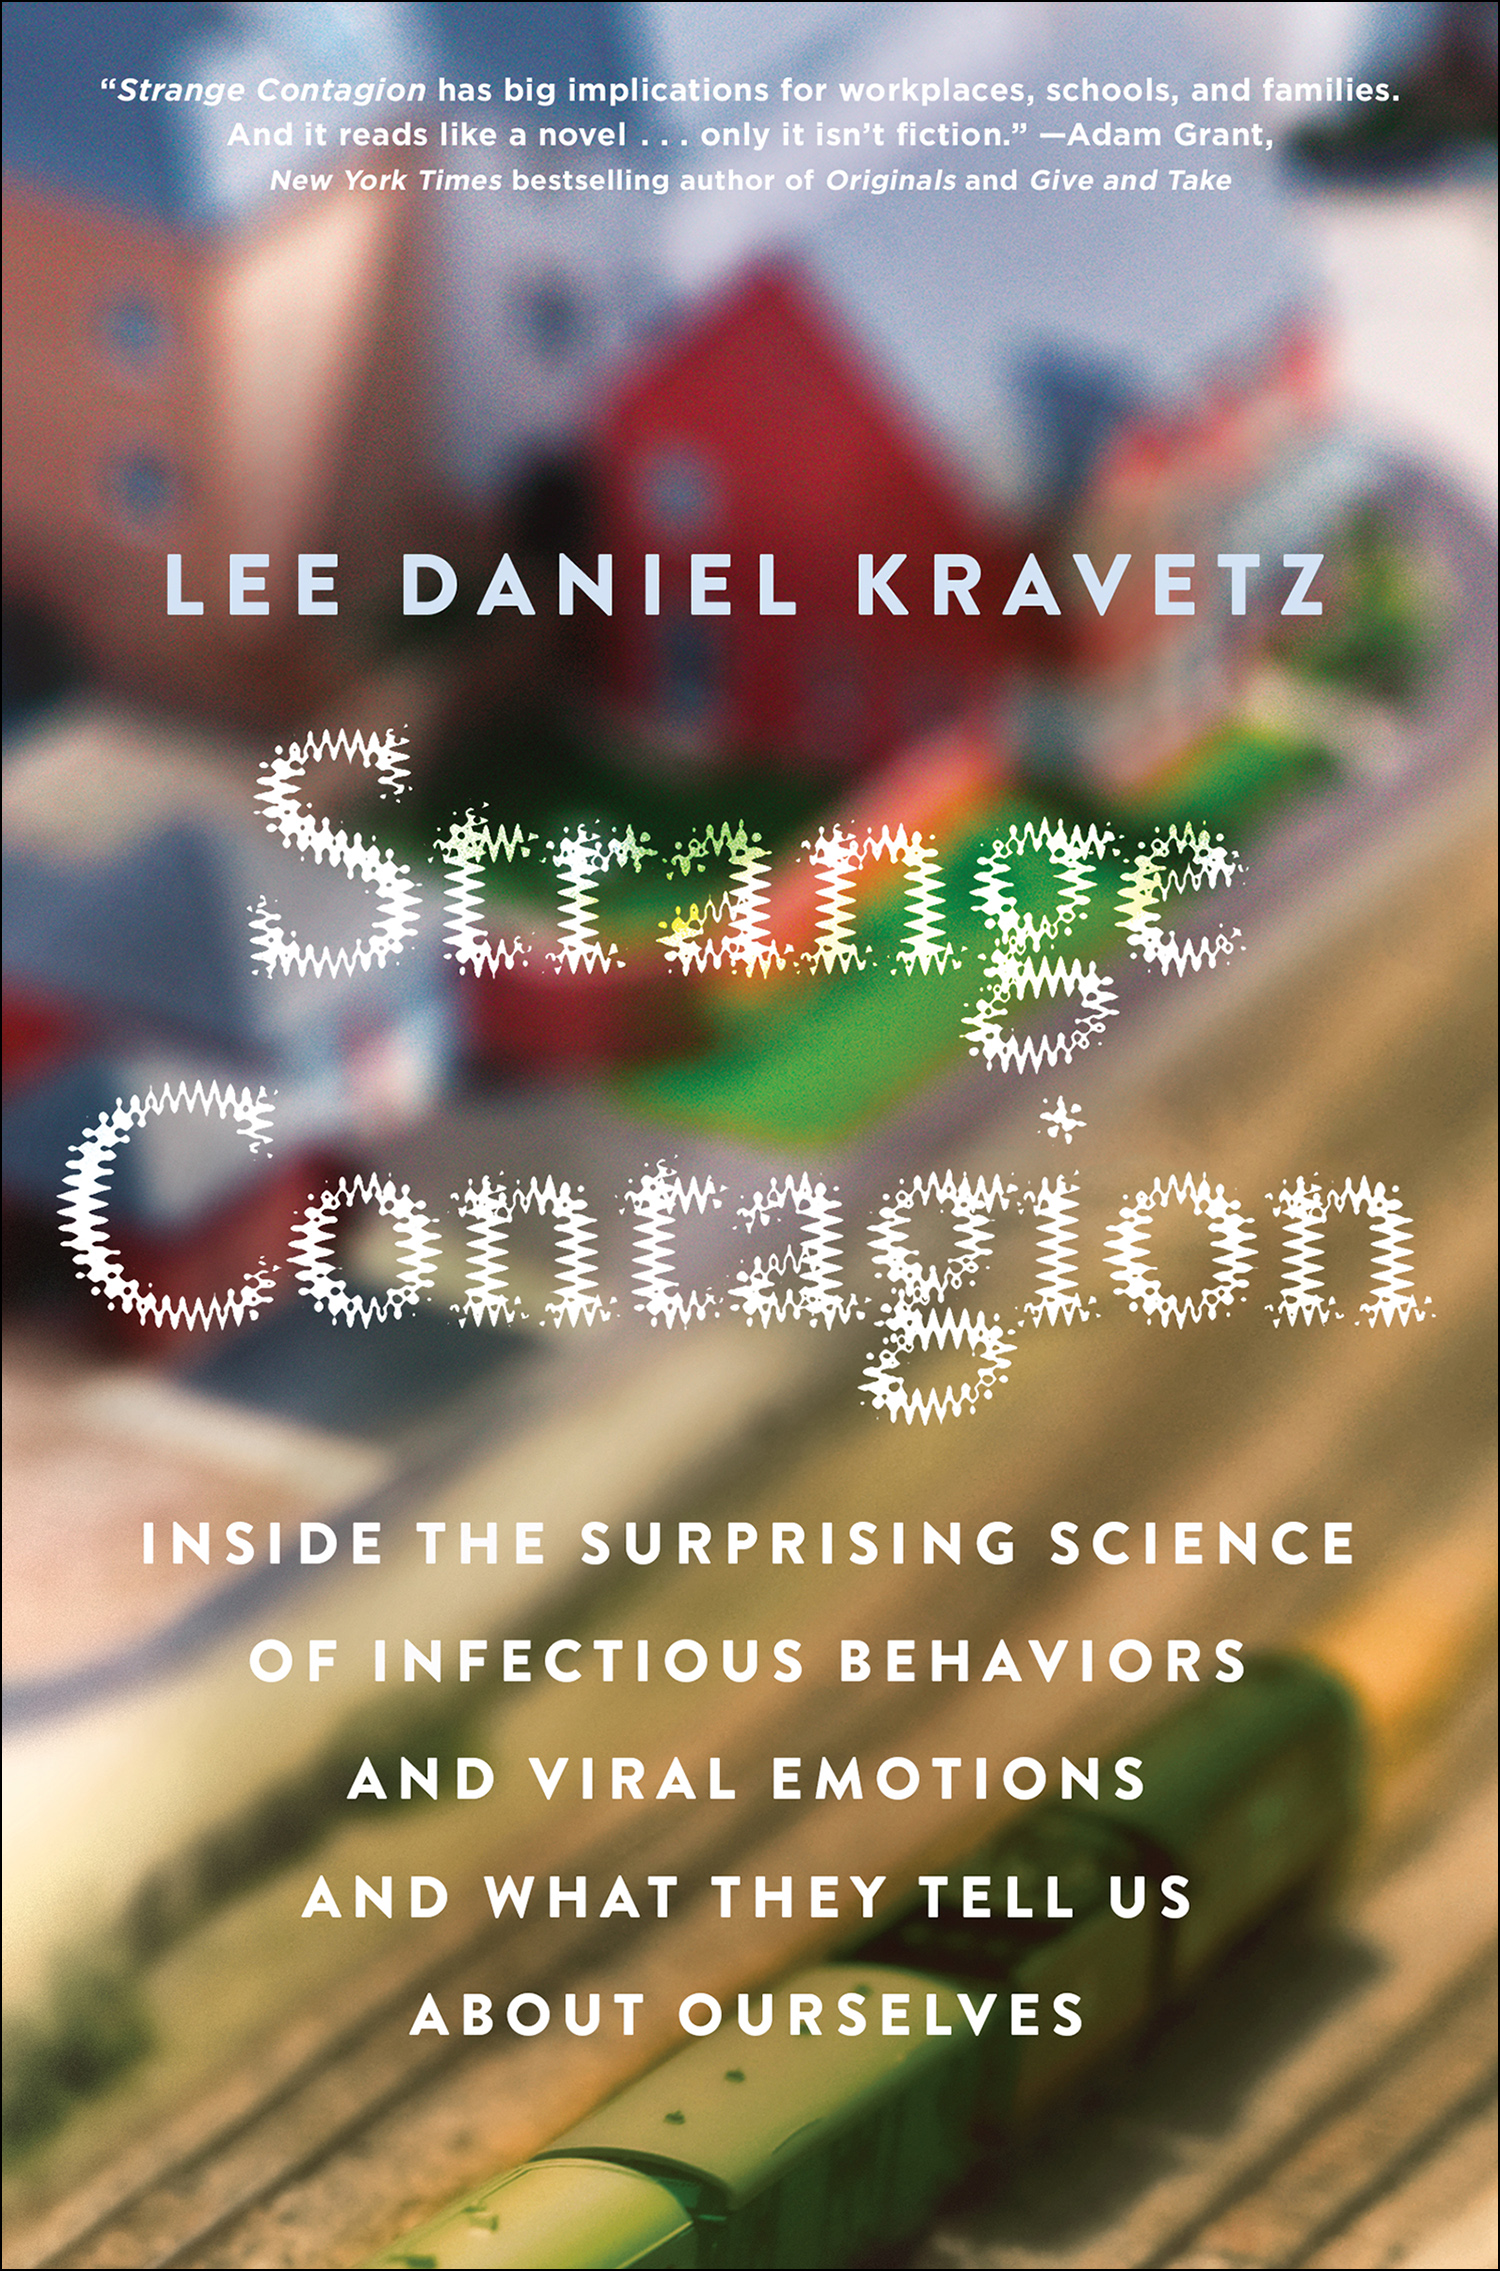 Strange contagion inside the surprising science of infectious behaviors and viral emotions and what they tell us about ourselves cover image